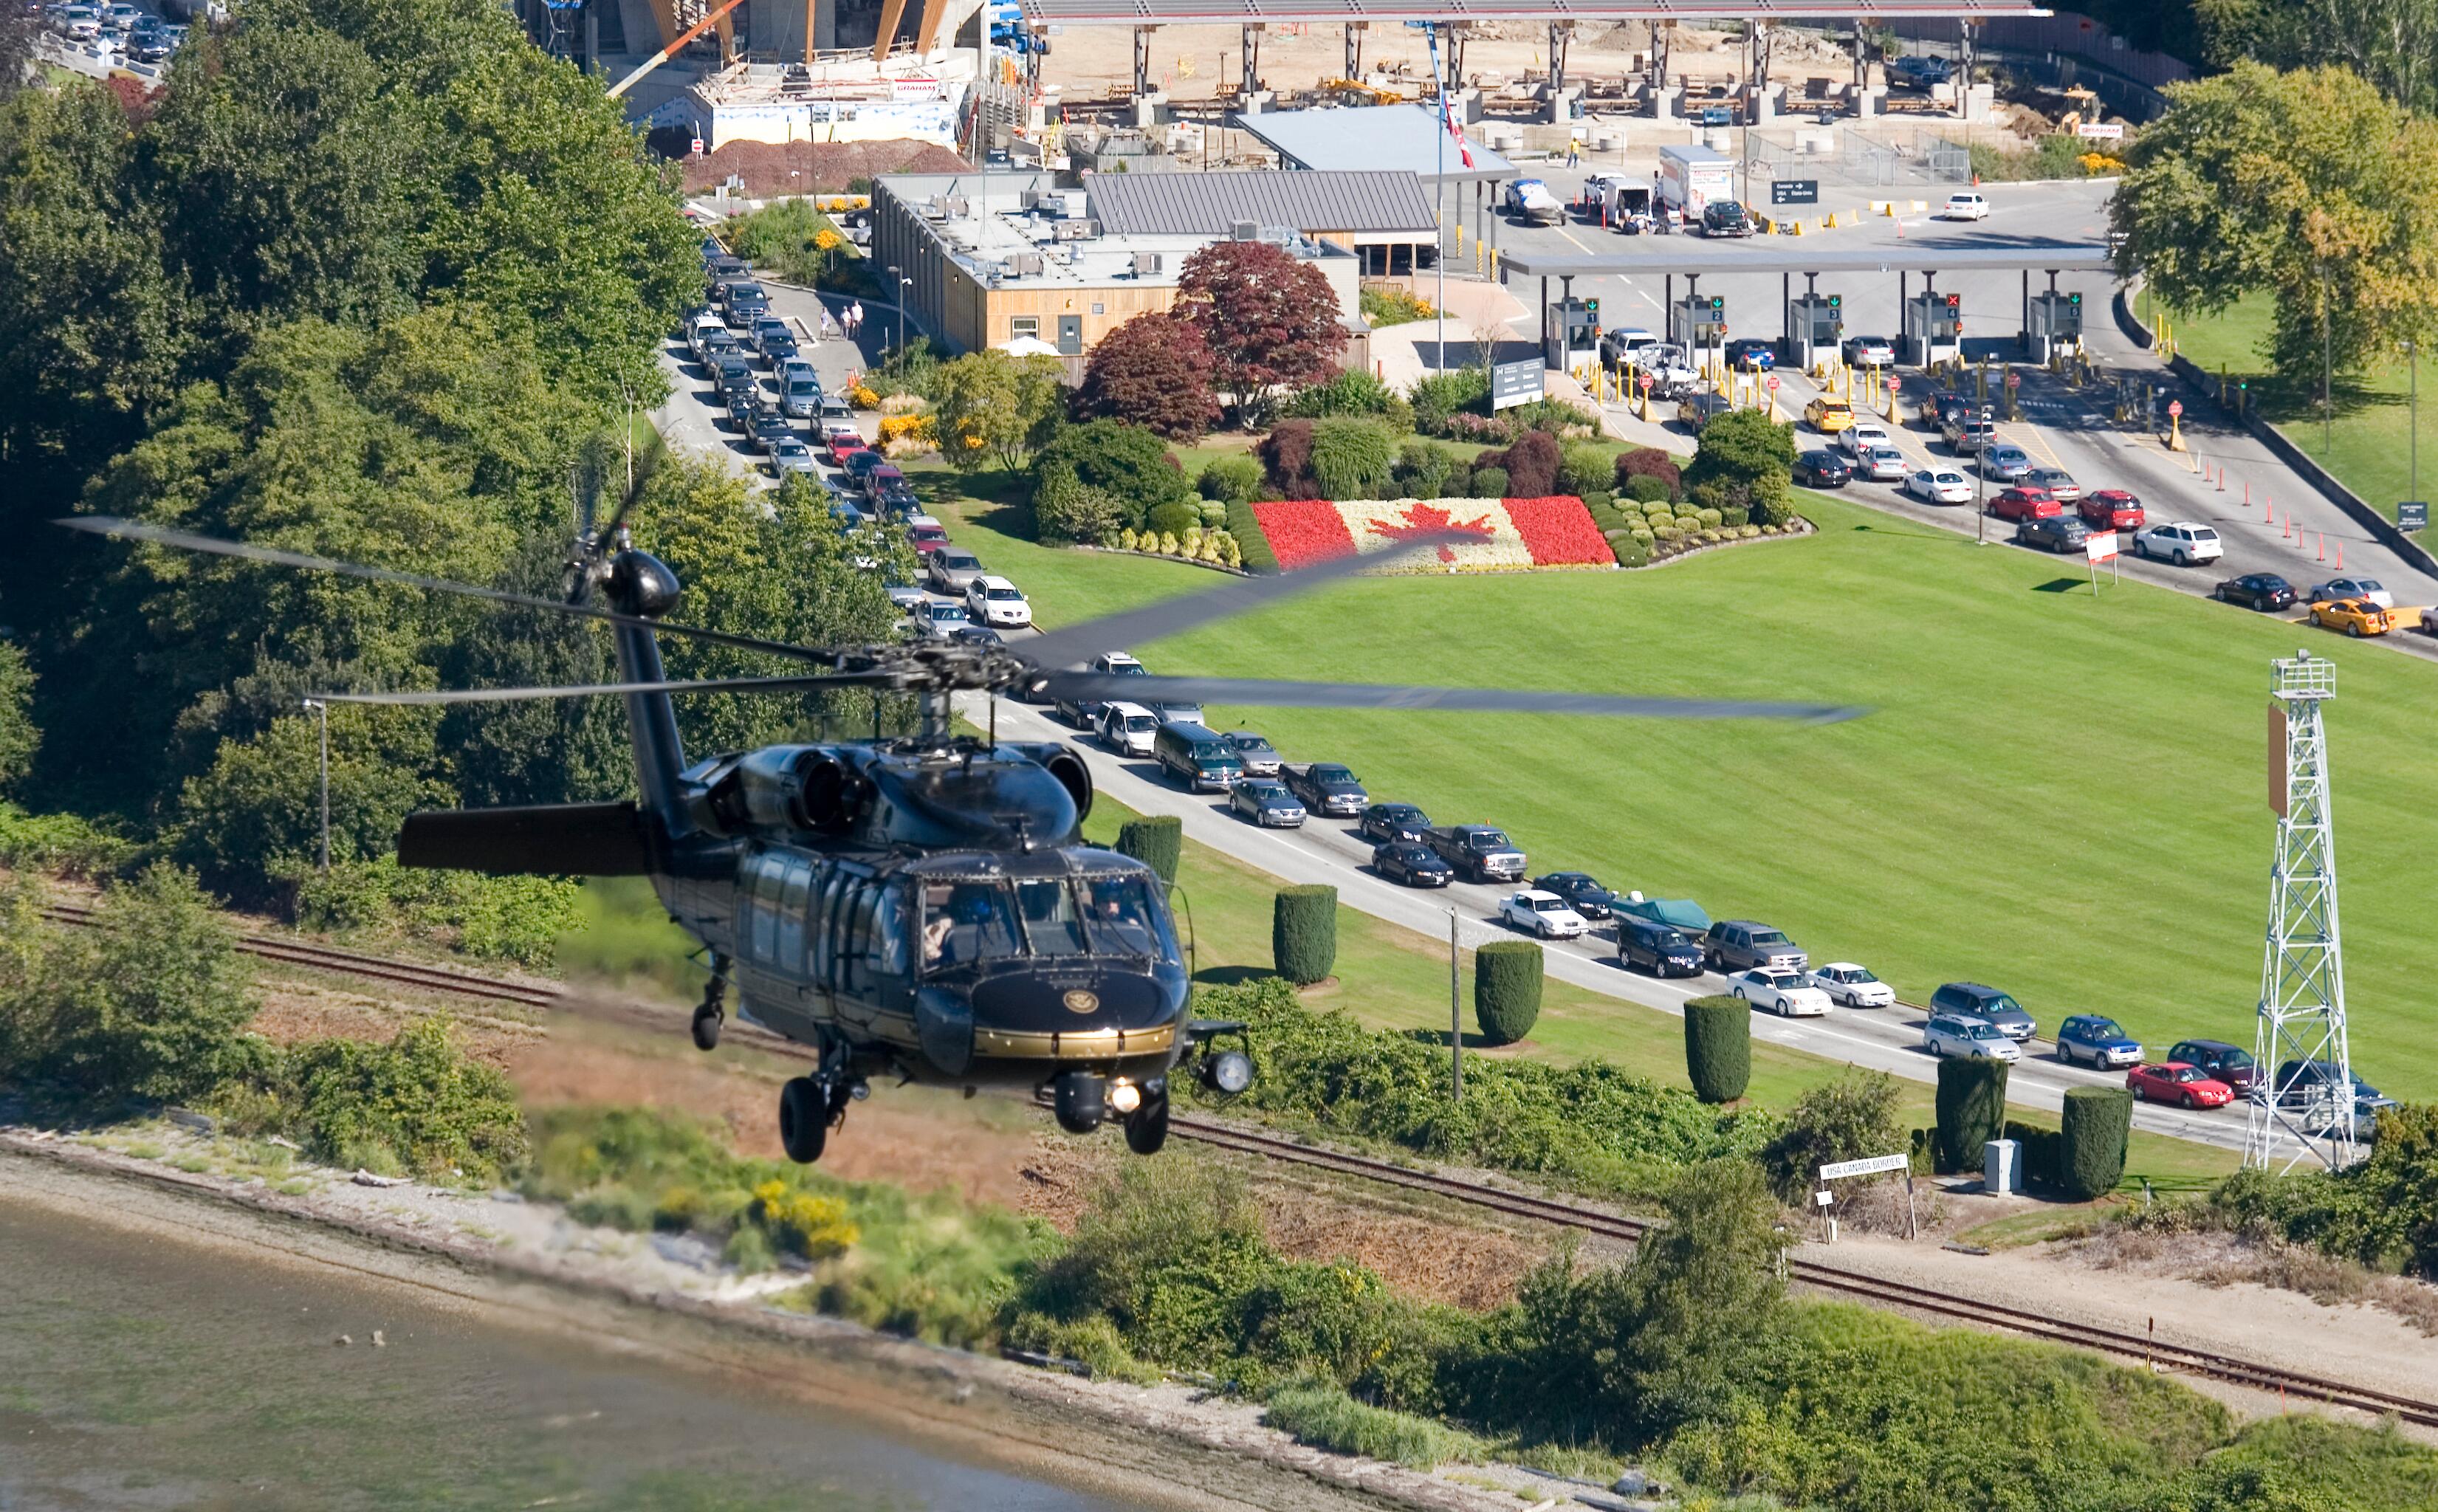 An Air and Marine Operations UH-60 crew from the Bellingham Air and Marine Branch flies near the U.S./Canada border.